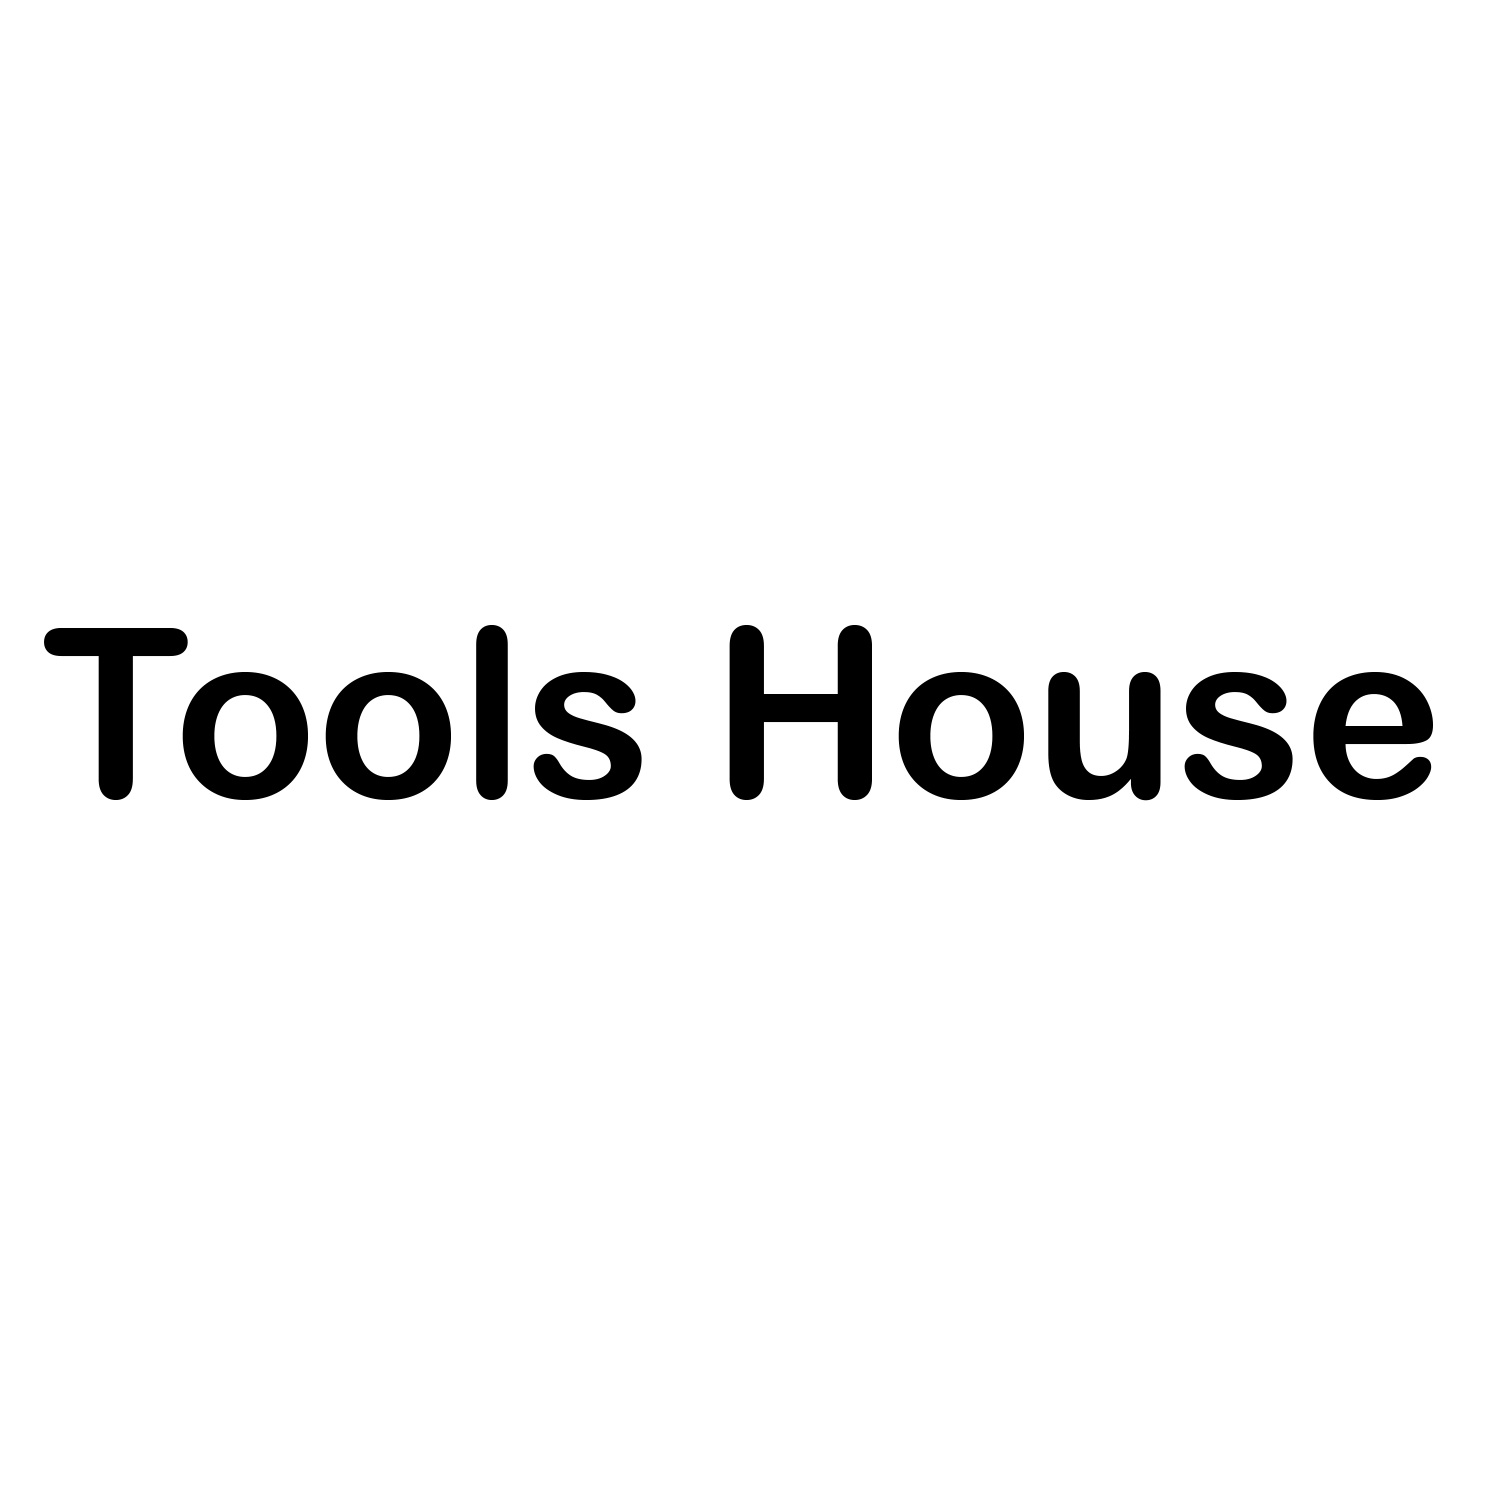 Tools House